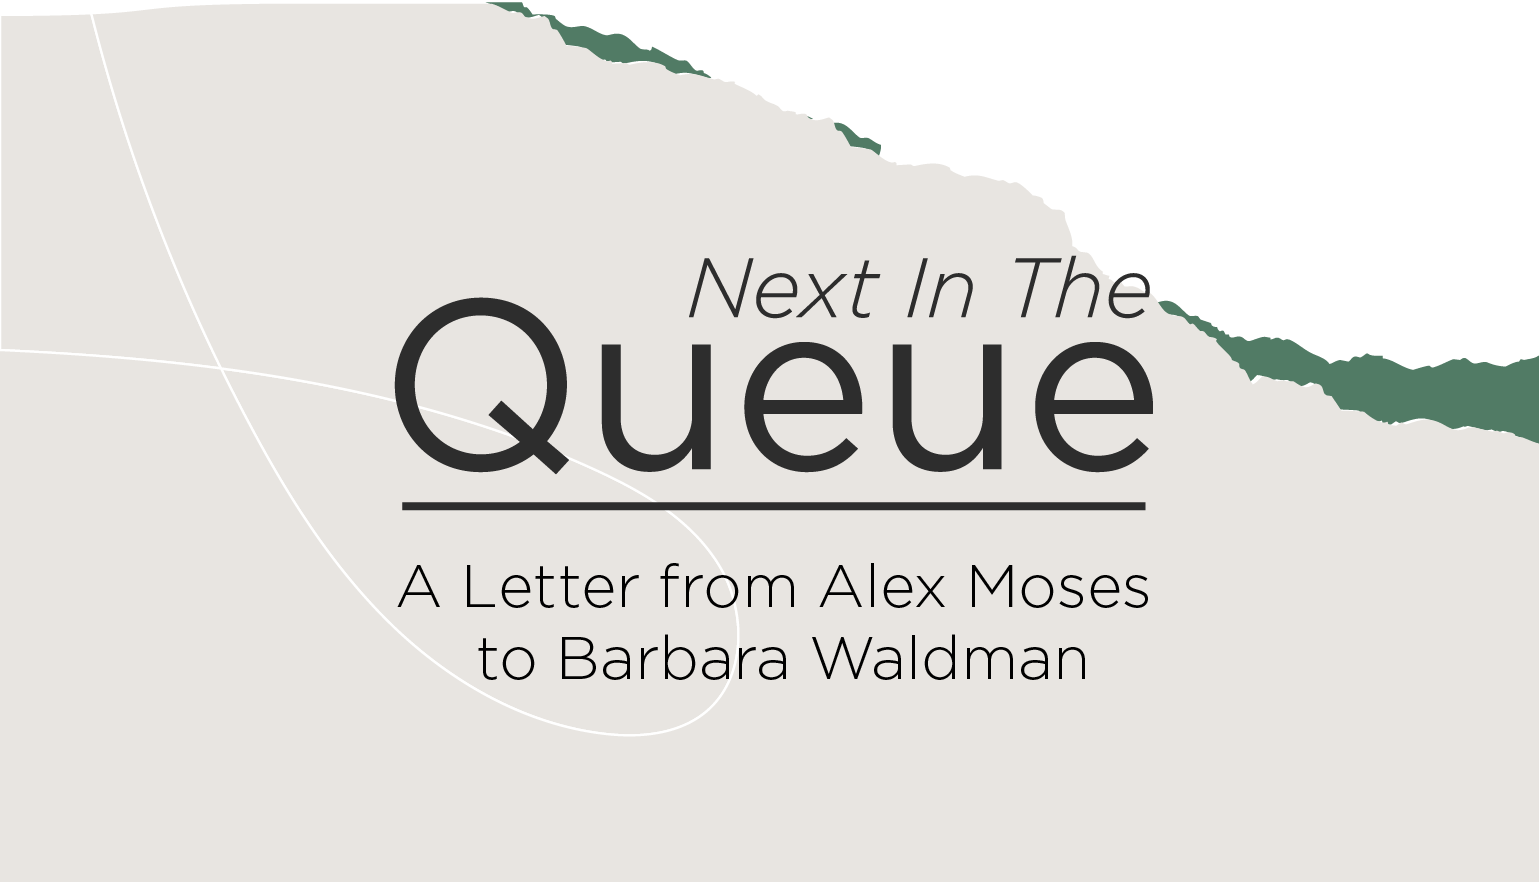 blog post cover graphic for The Queue featuring Alex Moses and Barbara Waldman